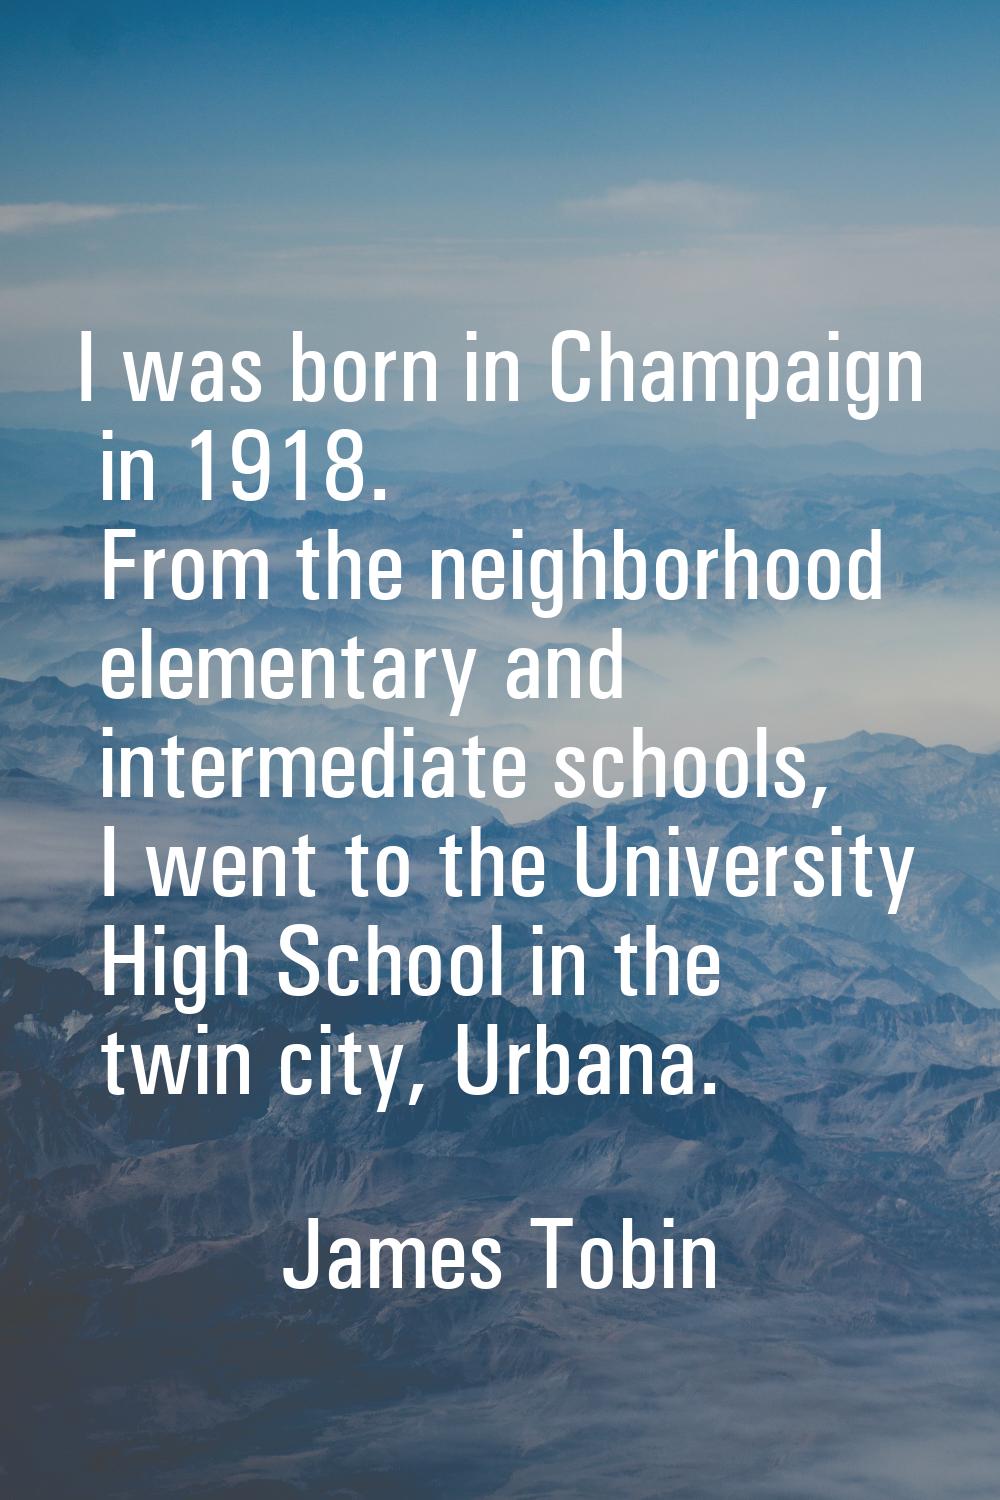 I was born in Champaign in 1918. From the neighborhood elementary and intermediate schools, I went 